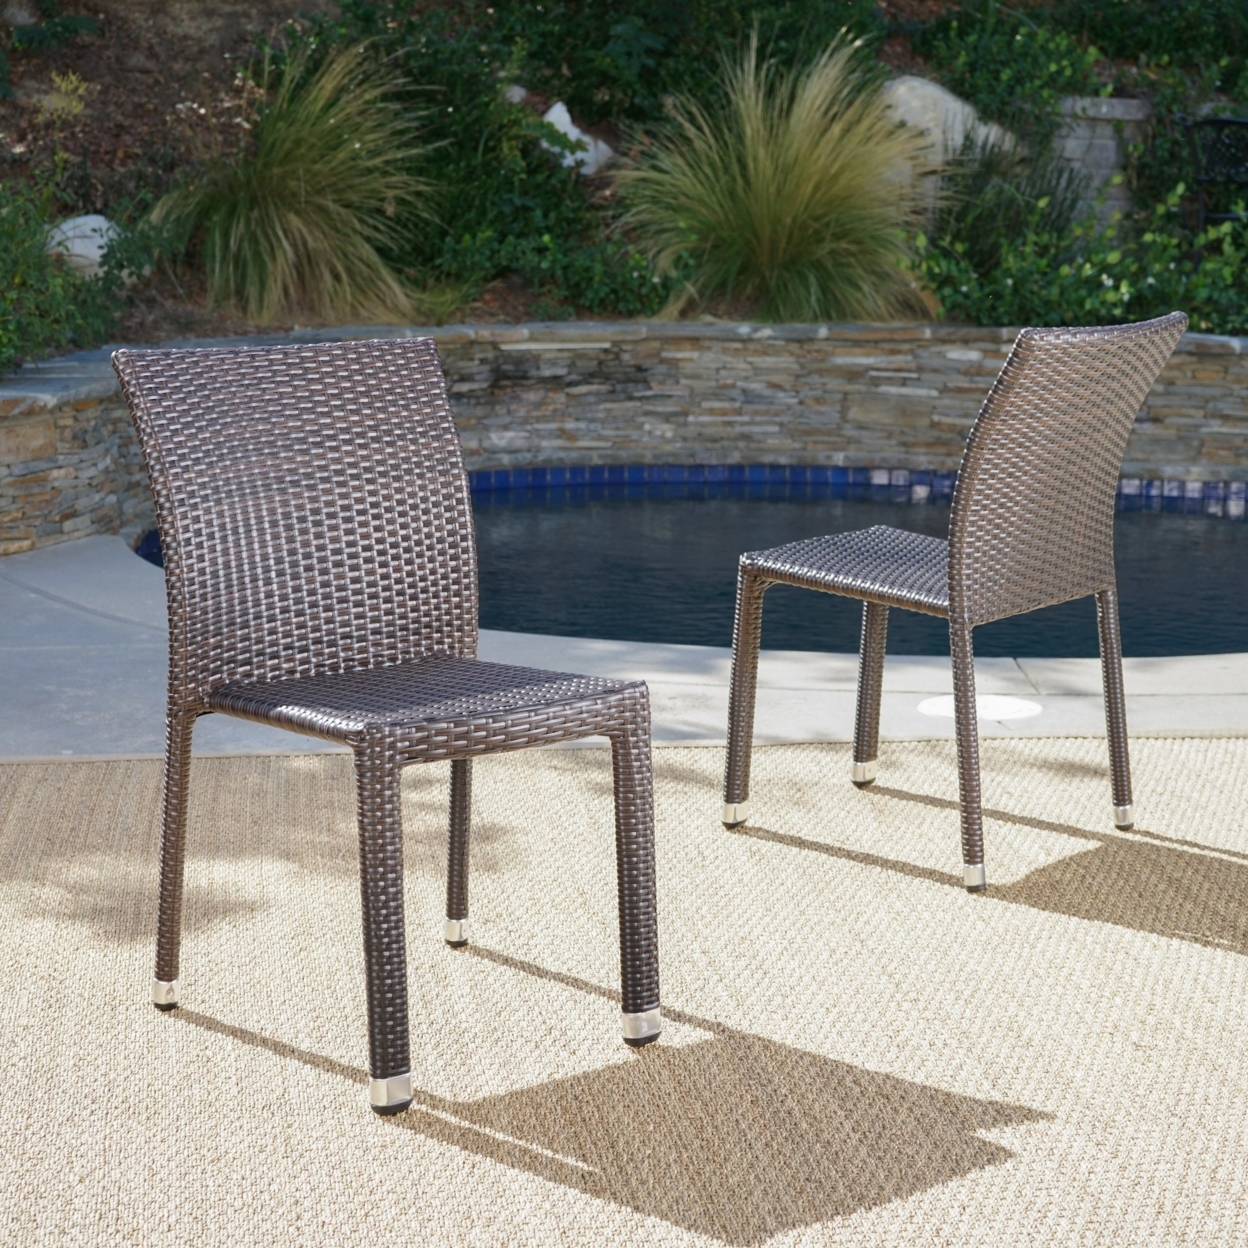 Dorside Outdoor Wicker Armless Stack Chairs With Aluminum Frame - Multi-brown, Set Of 2